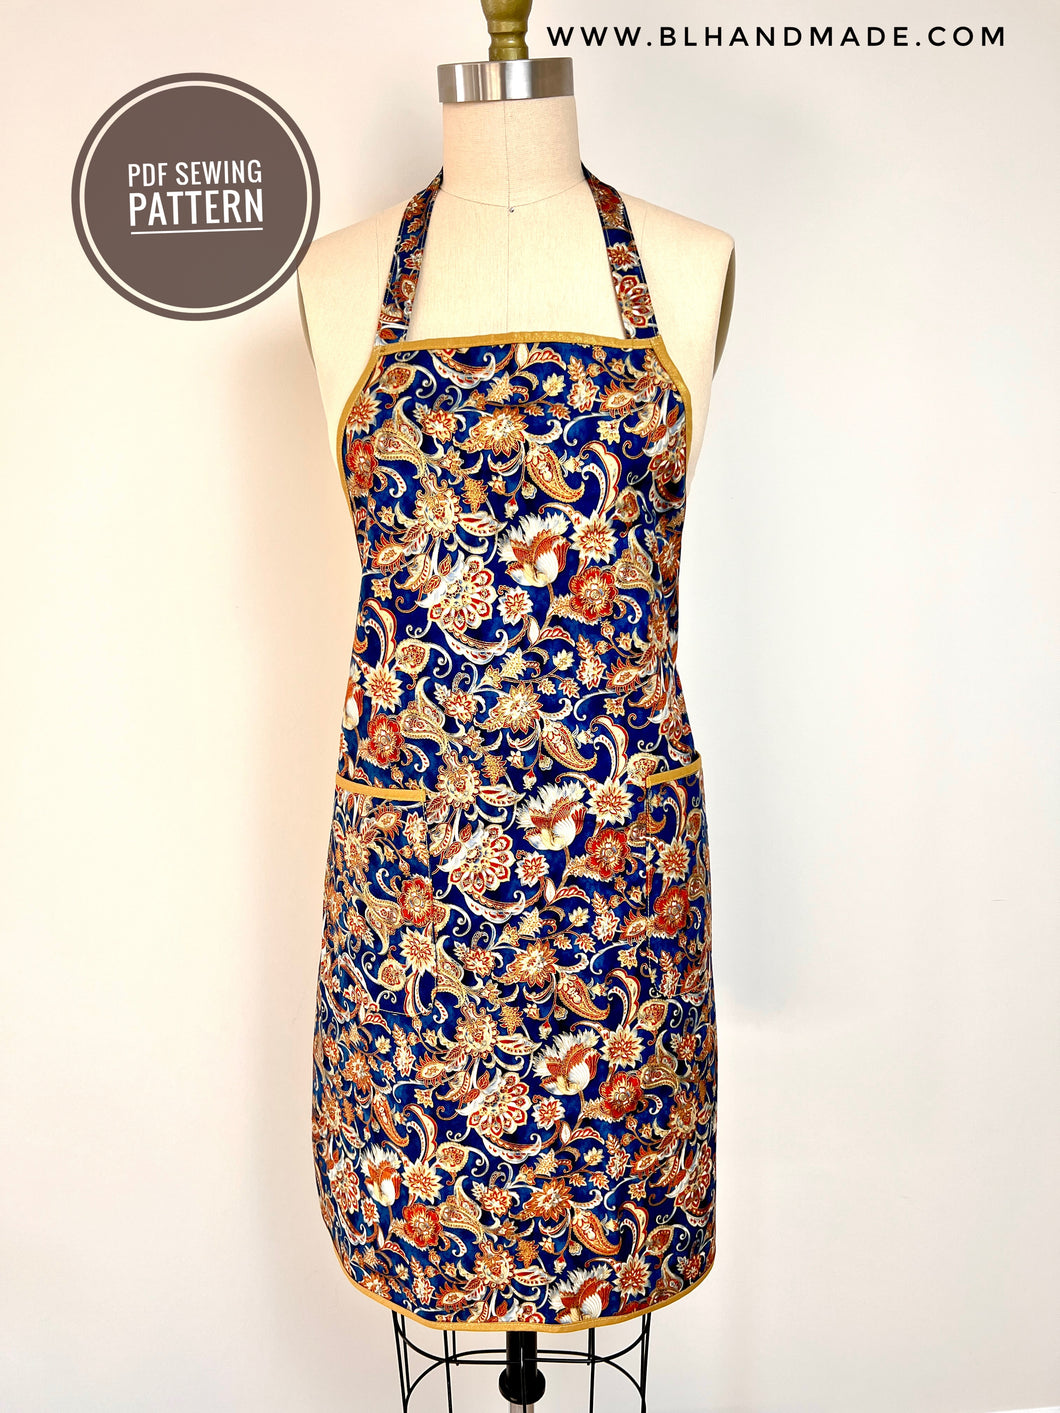 DIY Apron Sewing Pattern; Custom Apron Design; Homemade Apron Tutorial; Modern Apron Pattern; Vintage Apron Sewing Instructions; Kitchen Apron Template; Easy Apron Sewing Project; Adjustable Apron Pattern; Full Coverage Apron Design; Child and Adult Apron Patterns; Floral Apron Sewing Instructions; Chef's Apron Template; Personalized Apron Pattern; Classic Apron Design; PDF Downloadable Apron Pattern